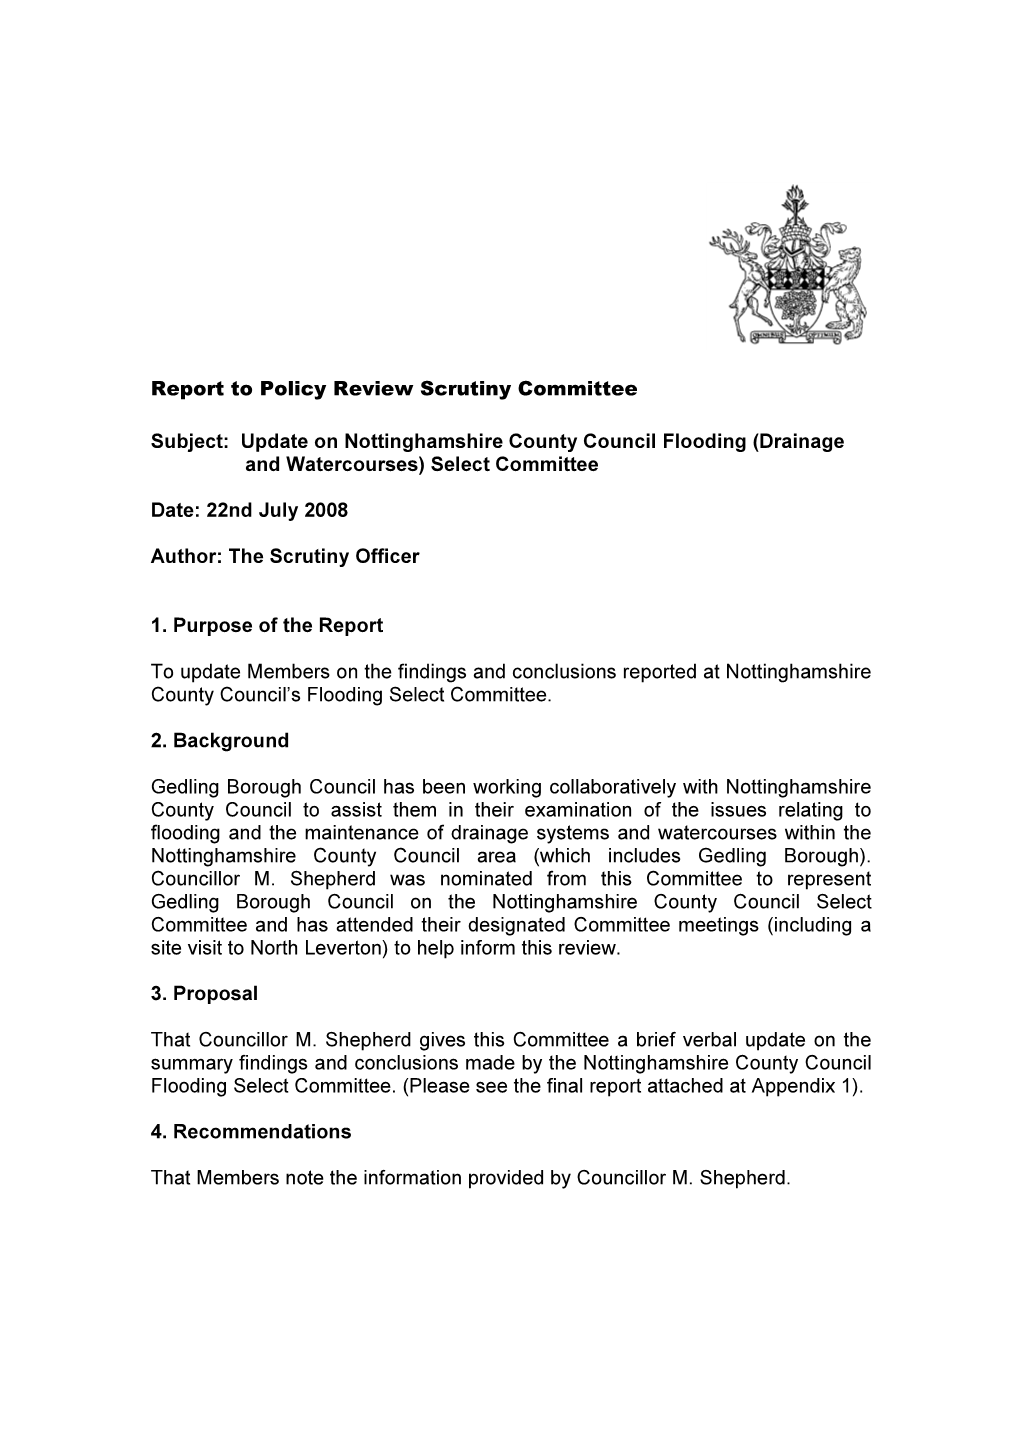 Update on Nottinghamshire County Council Flooding (Drainage and Watercourses) Select Committee